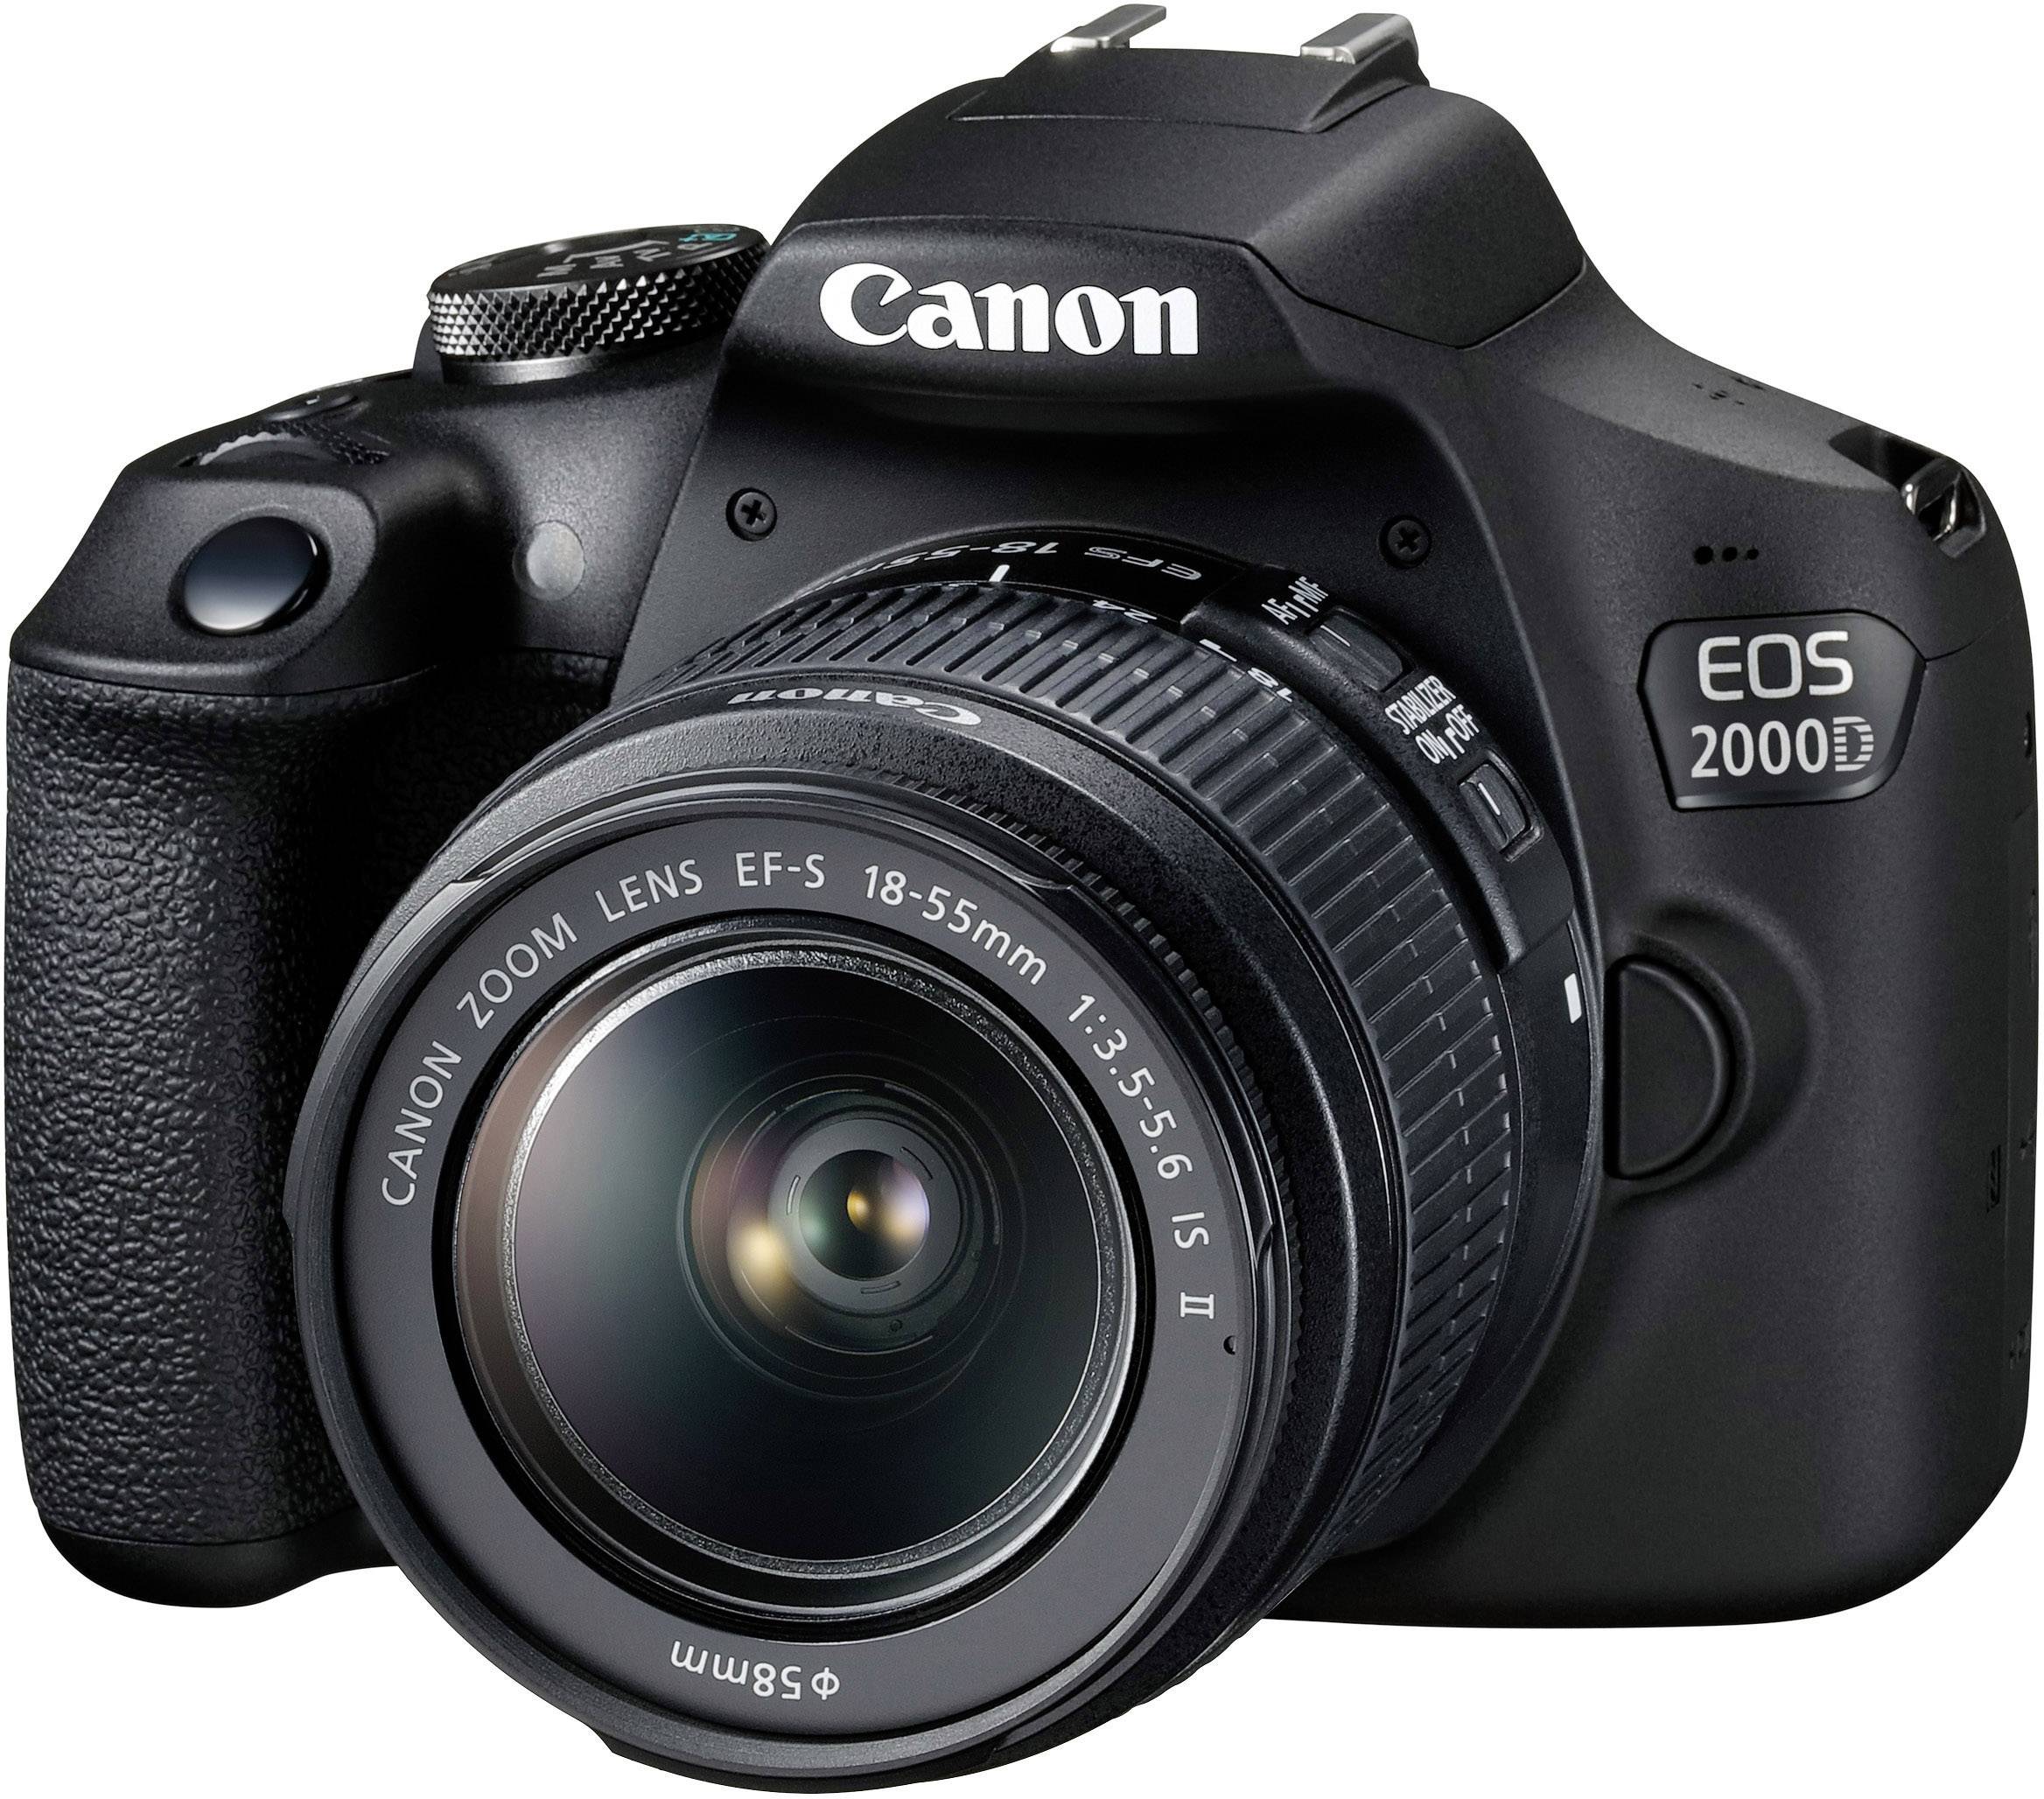 Canon EOS 2000D Digital SLR Camera with 18-55mm IS II Lens - Product Photo  - Side view of the camera body with the lens attached